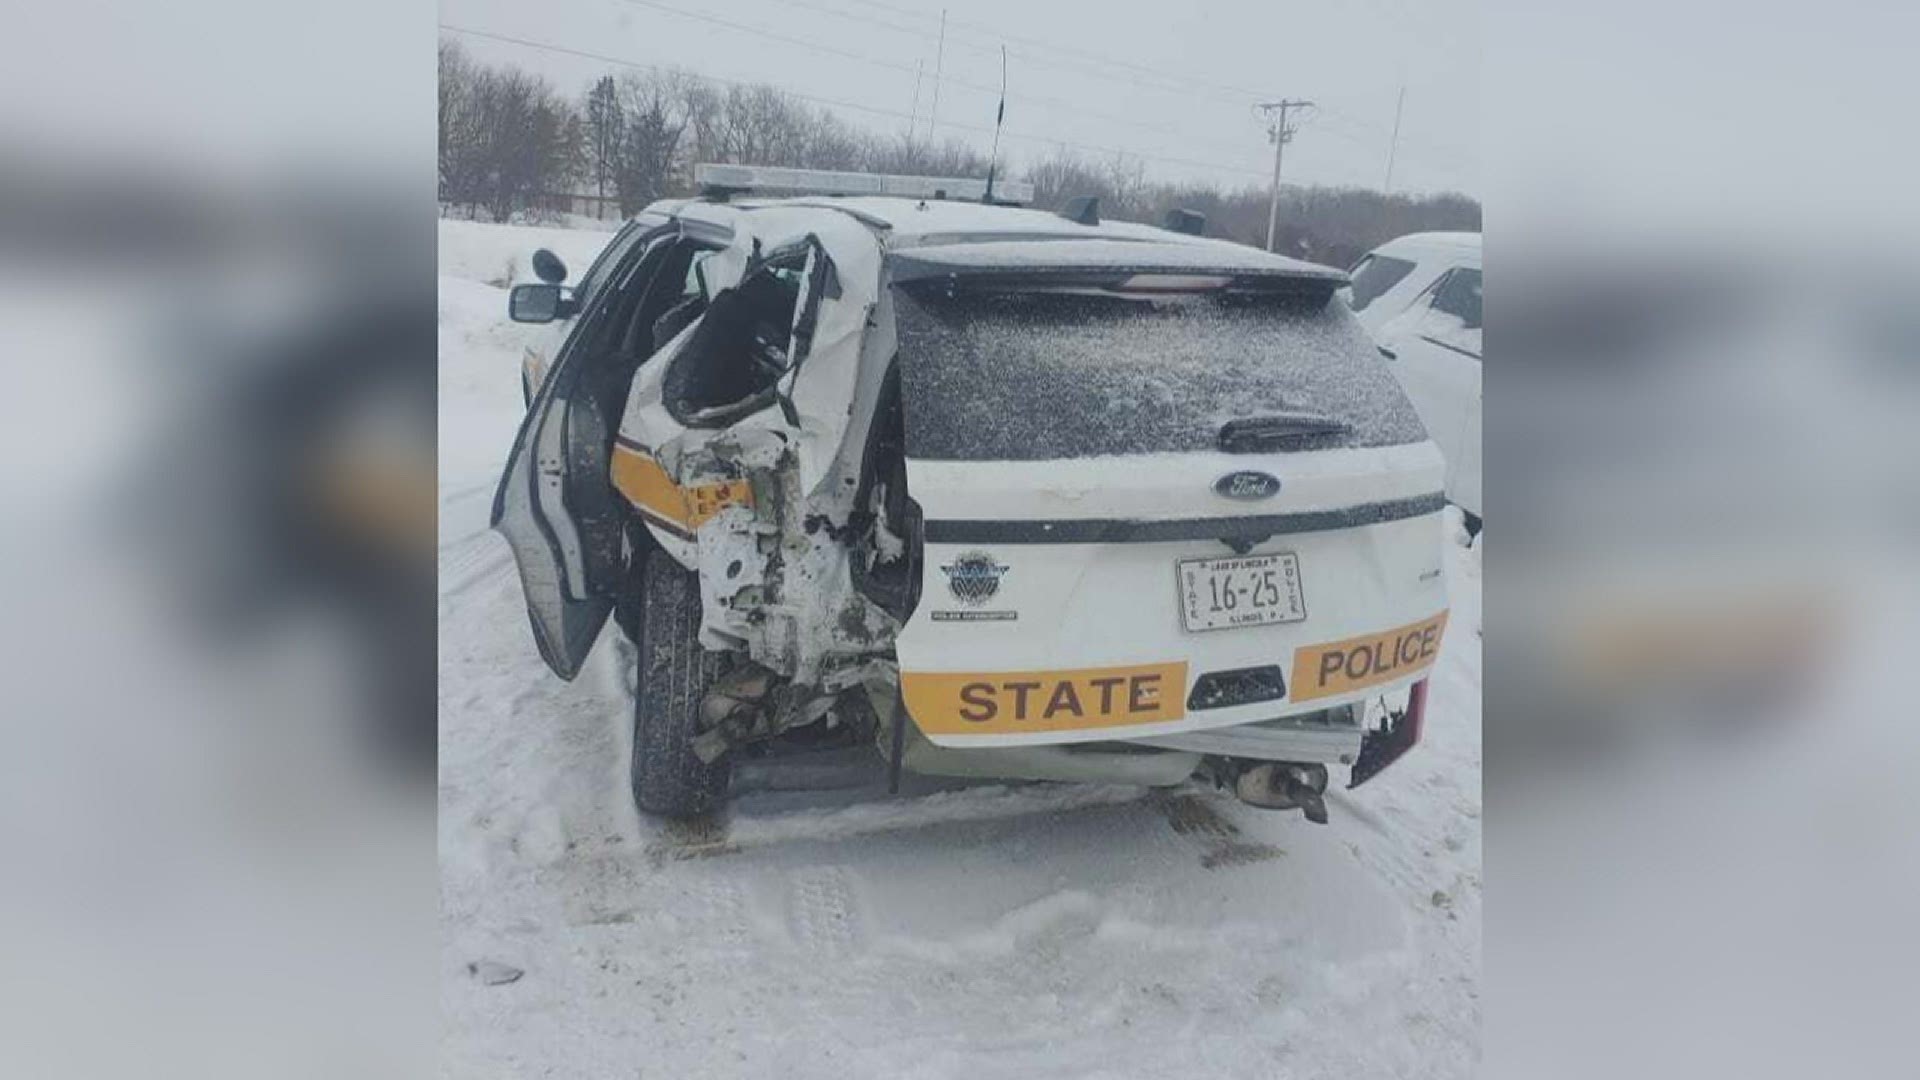 A 20-year-old woman crashed into the back of the squad car on Feb. 15, 2021, around 11:46 a.m. in Will County, Illinois.